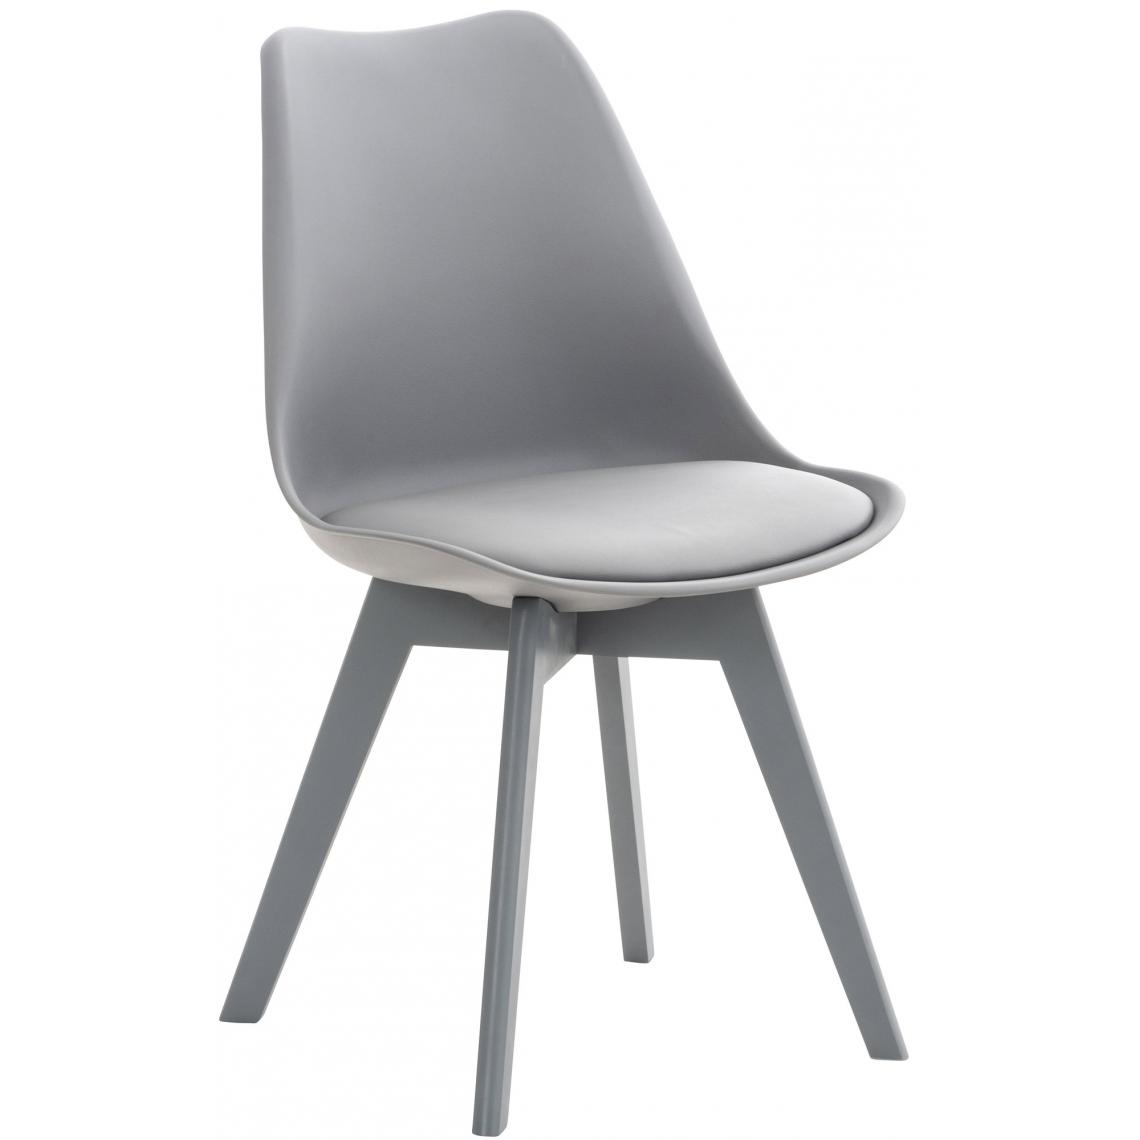 Icaverne - Joli Chaise reference Oulan-Bator couleur gris / gris - Chaises